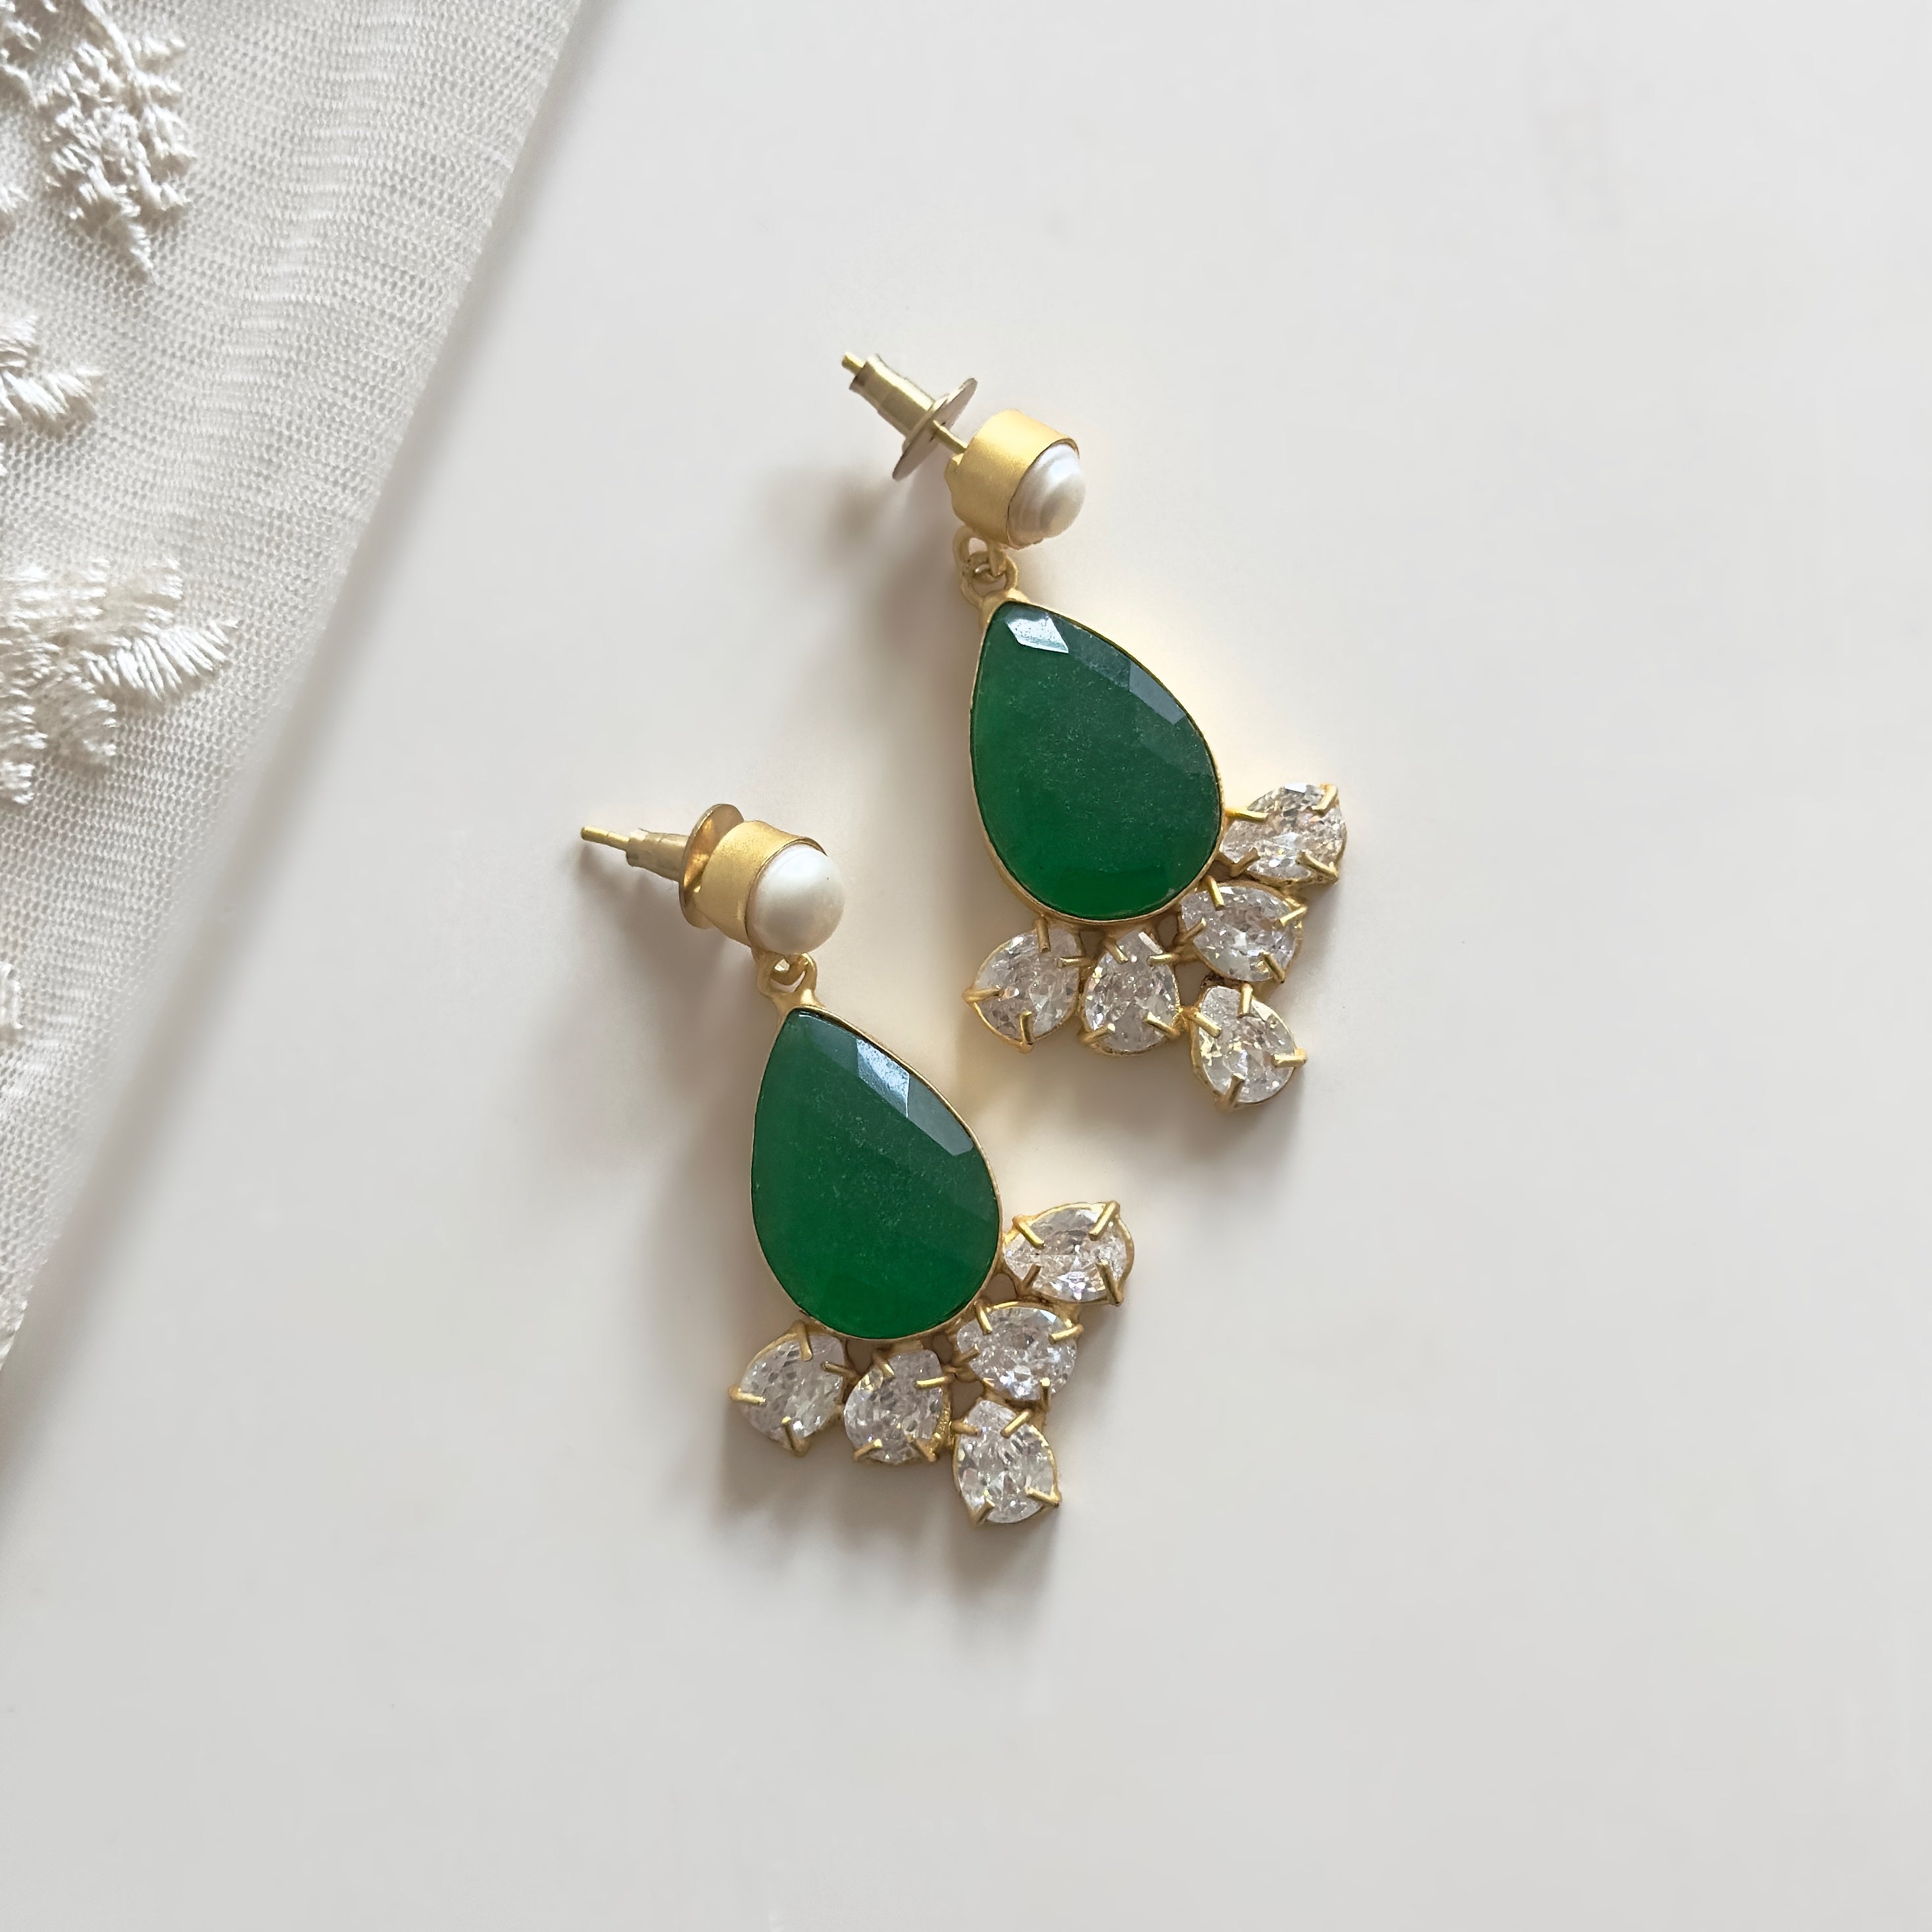 Elevate your outfit with our Holly Maroon Crystal Earrings. Featuring stunning green onyx with&nbsp; CZ crystals and a delicate pearl drop, these earrings add a touch of sophistication to any look.&nbsp;